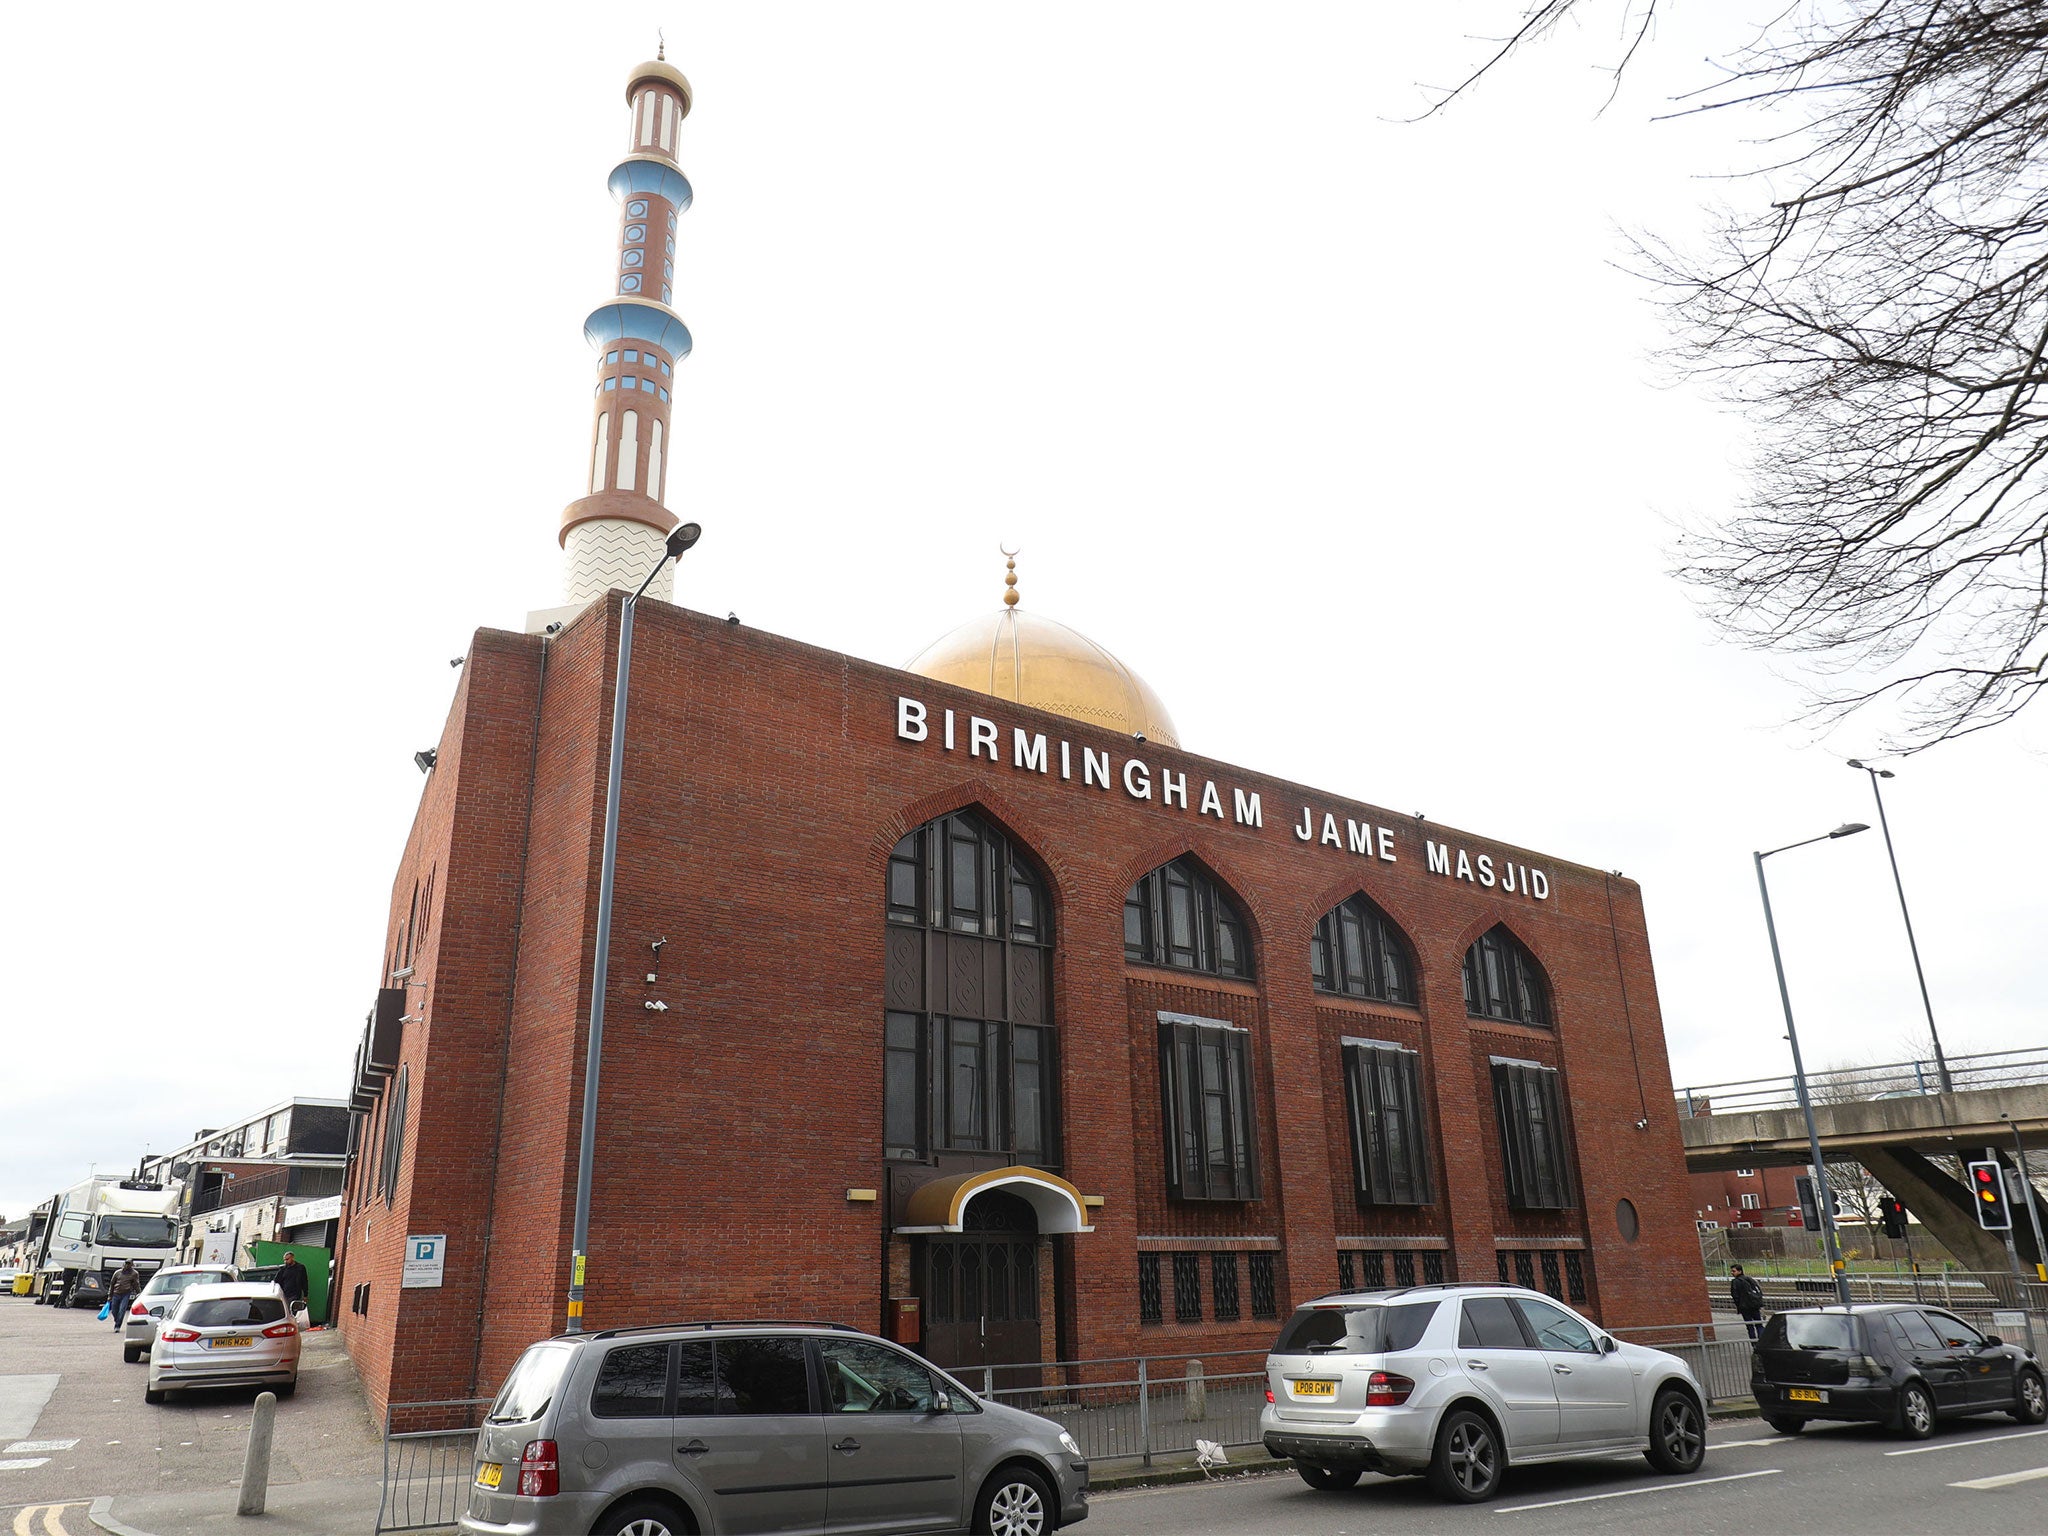 Birmingham Jame Masjid mosque was one of five Islamic centres attacked in the city